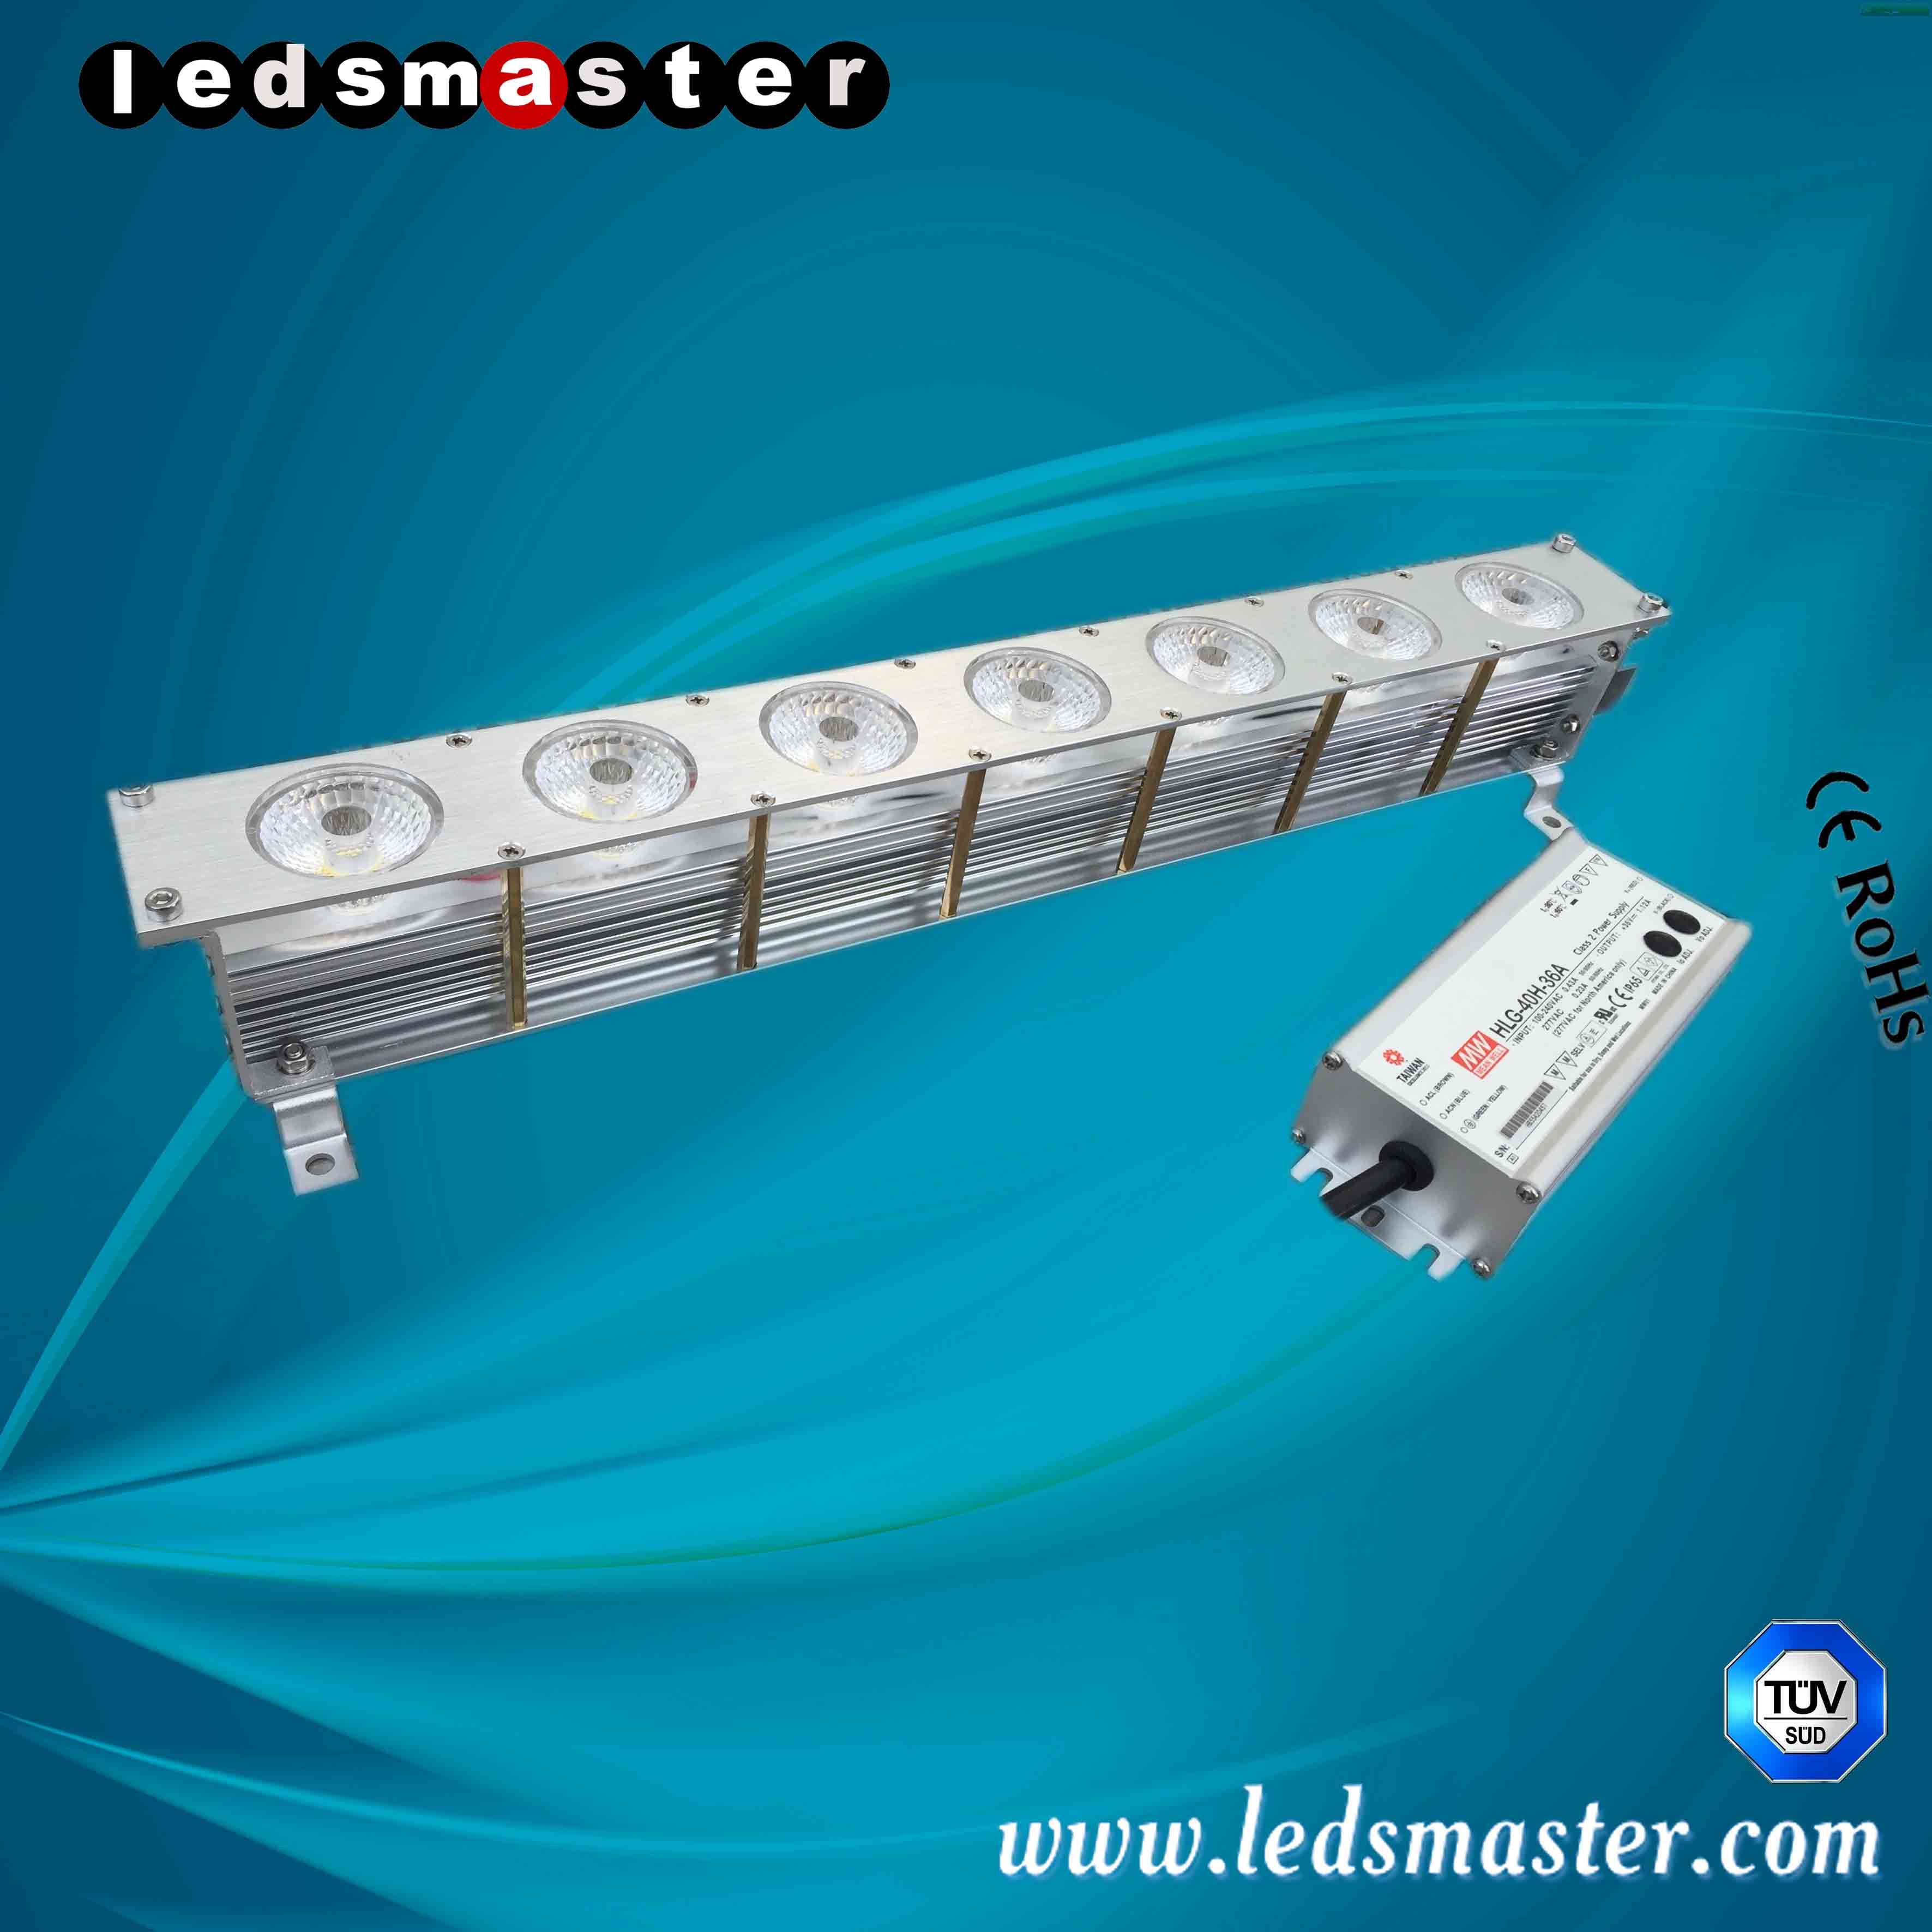 Easy Mounting 100lm/W LED Strip Light Linear